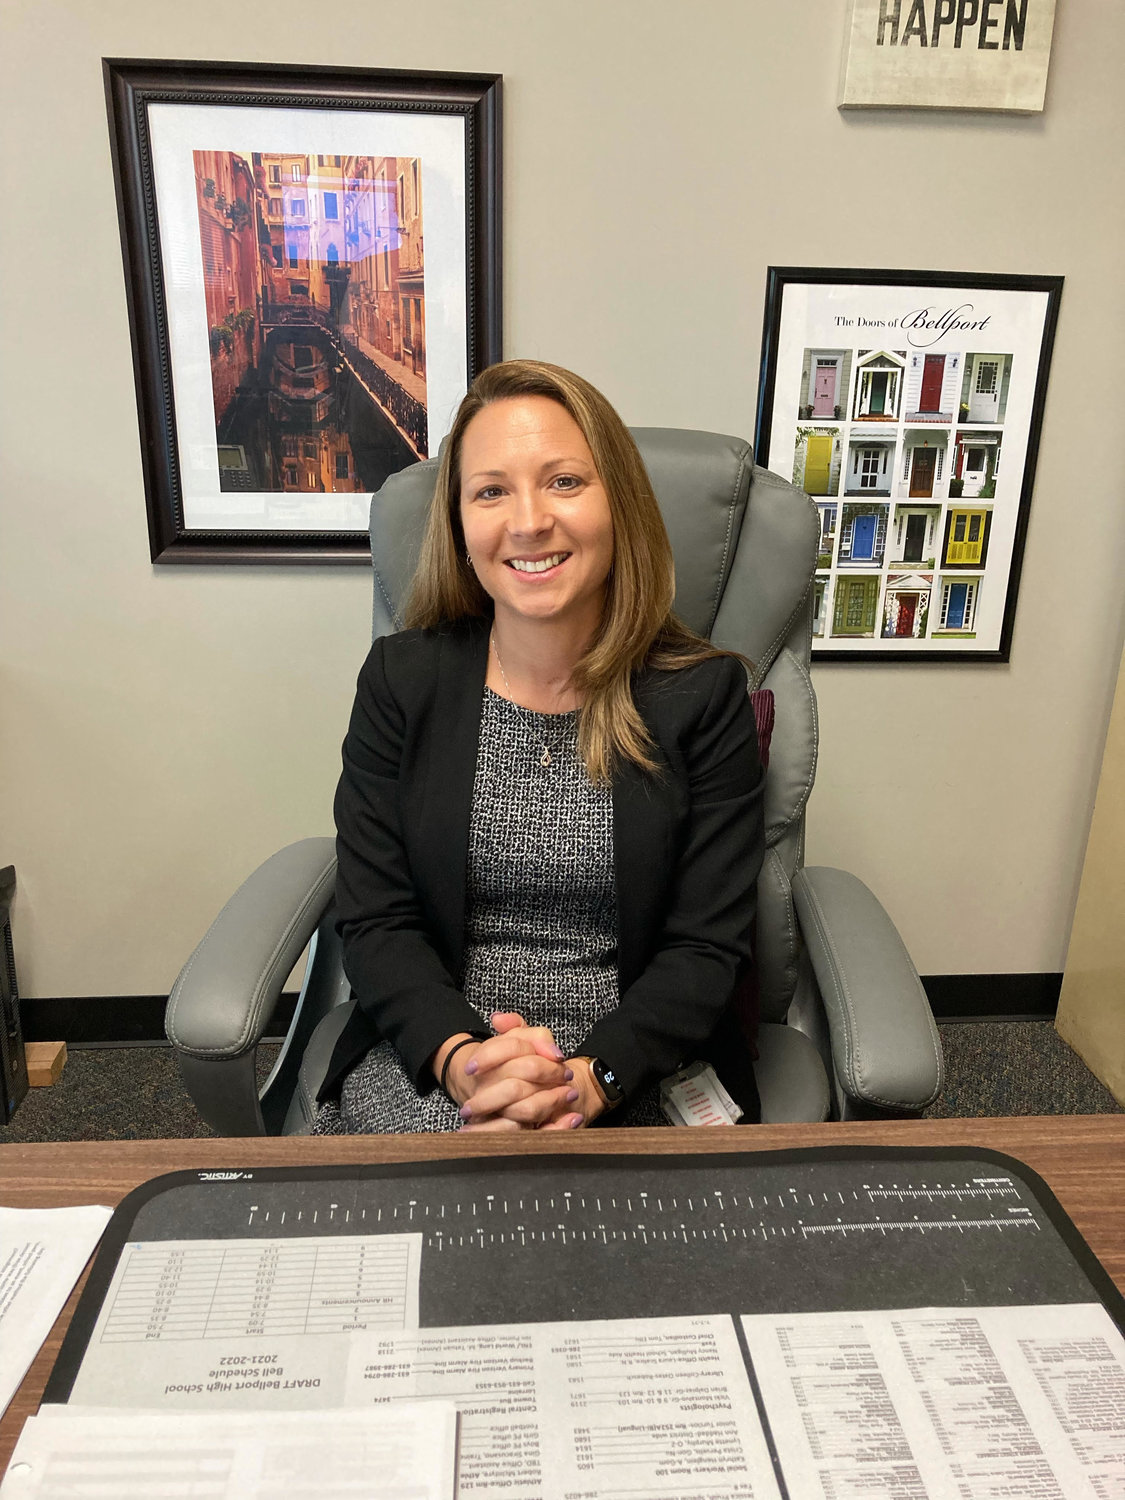 New principal Erika Della Rosa plans to beat out former principal and mentor Tim Hogan’s longest run as a seated principal for nine years in the last 40 years.